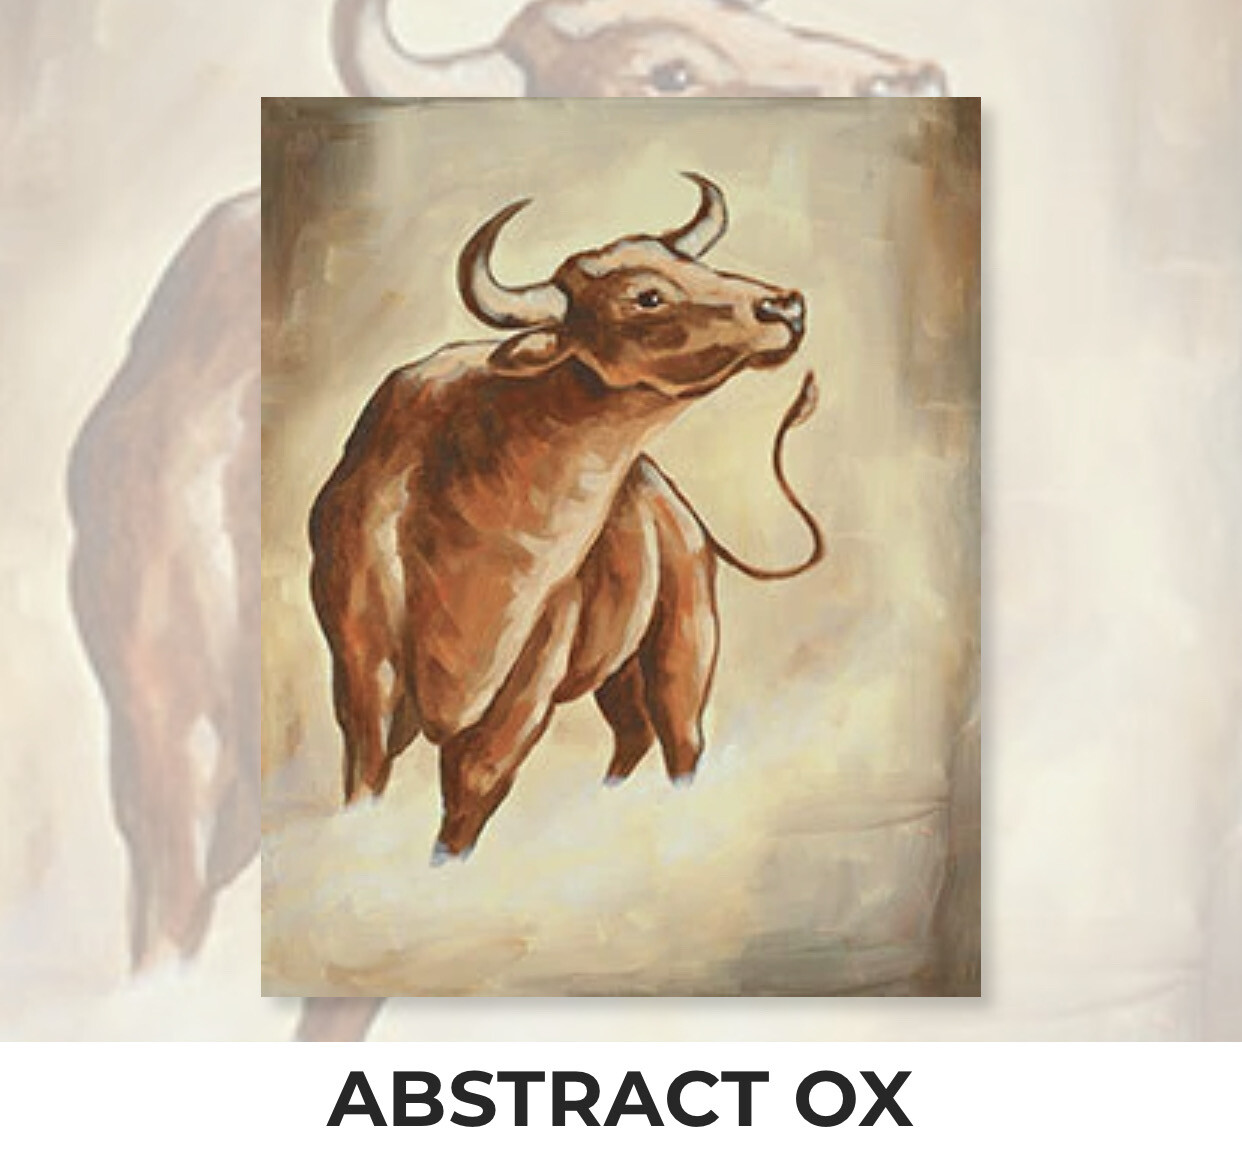 Abstract Ox ADULT Acrylic Paint On Canvas DIY Art Kit - 3 Week Special Order